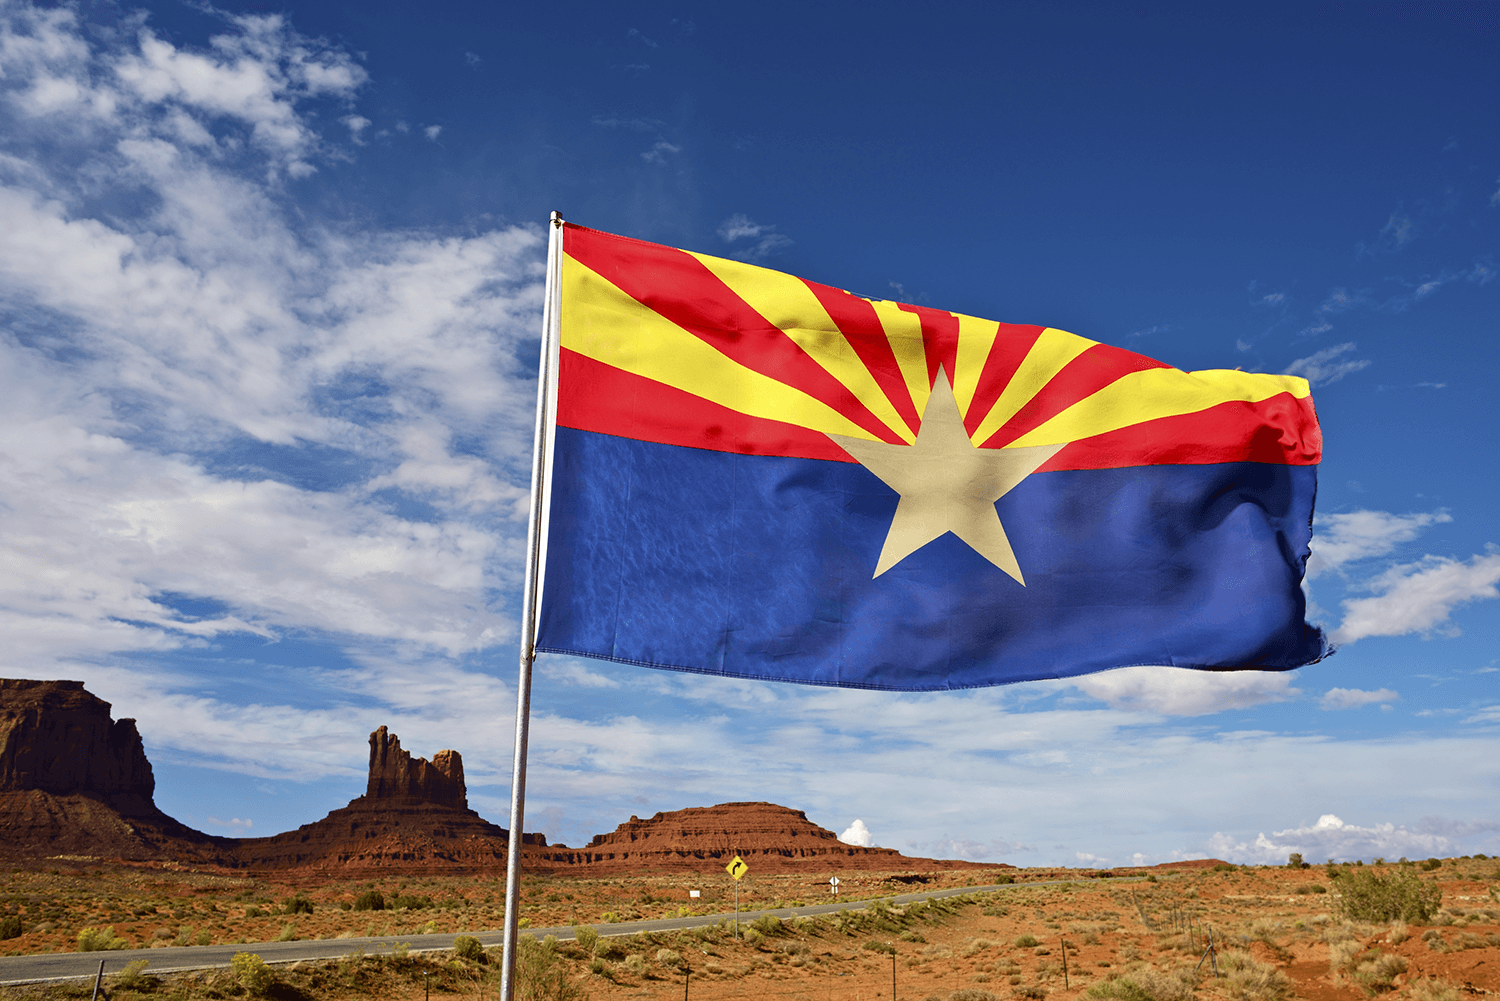 Arizona Bill to End State Participation in Refugee Resettlement Program Passes Committee